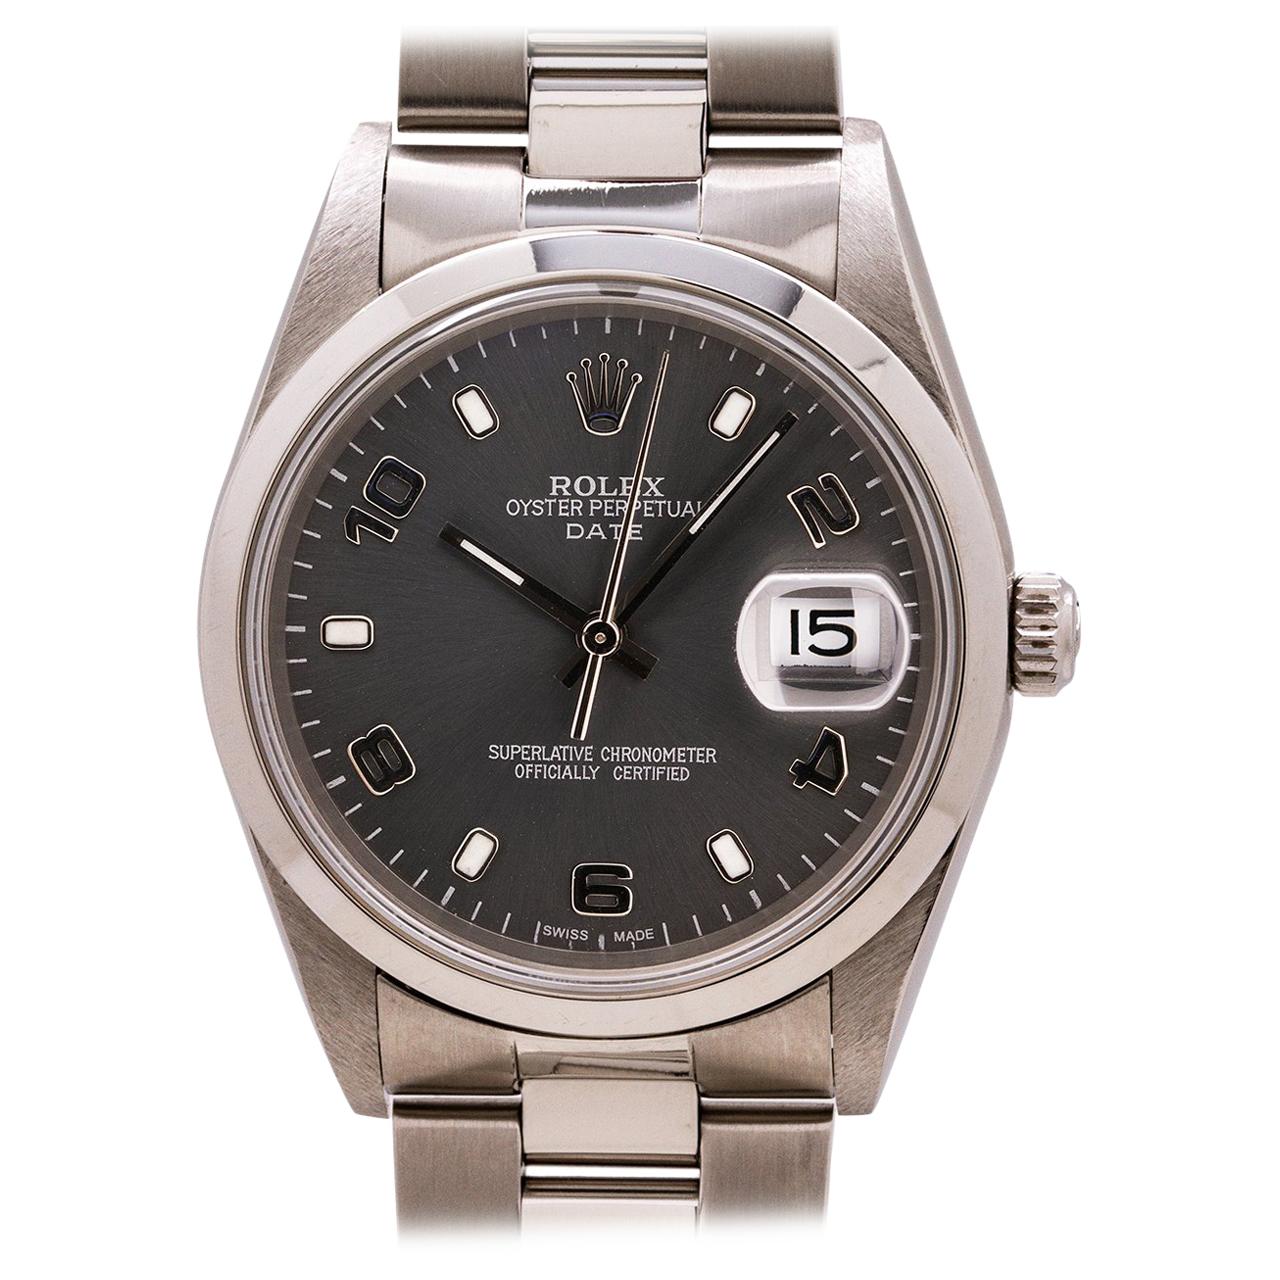 Rolex Oyster Perpetual Date Ref 15200 Stainless Steel circa 2002 Anthracite Gray For Sale